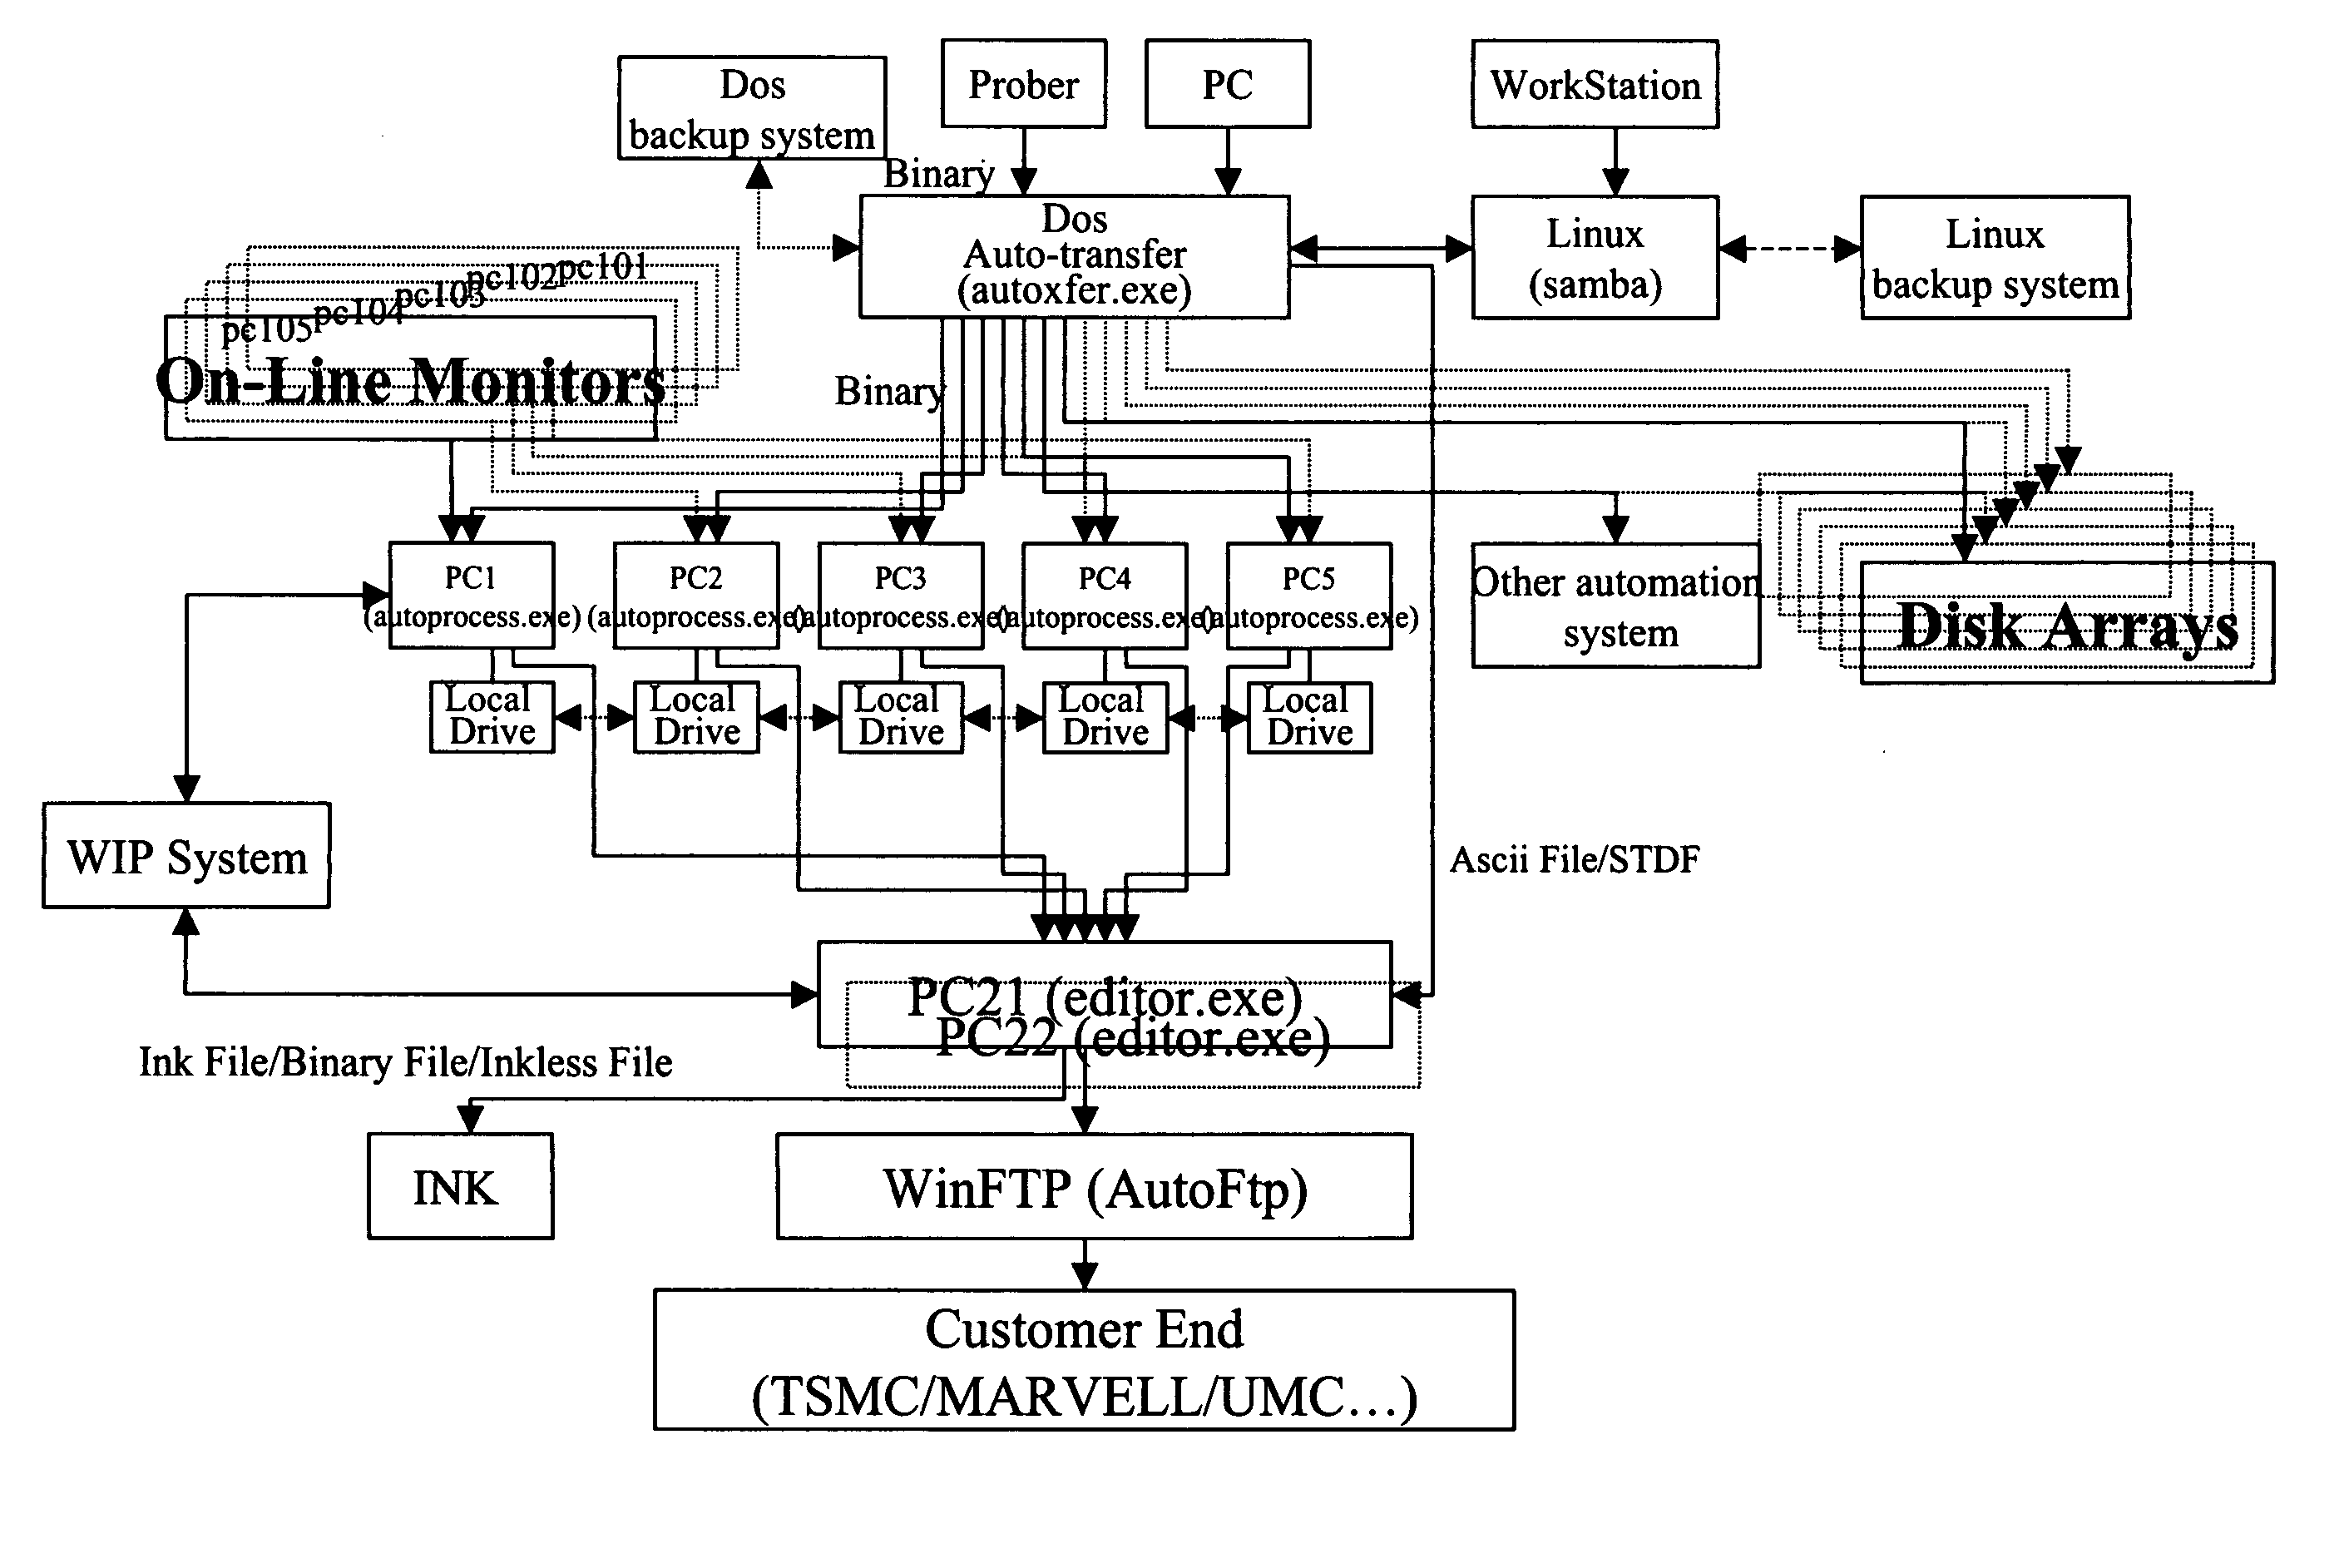 Universal and integrated wafer testing real-time monitoring software system and its open system architecture